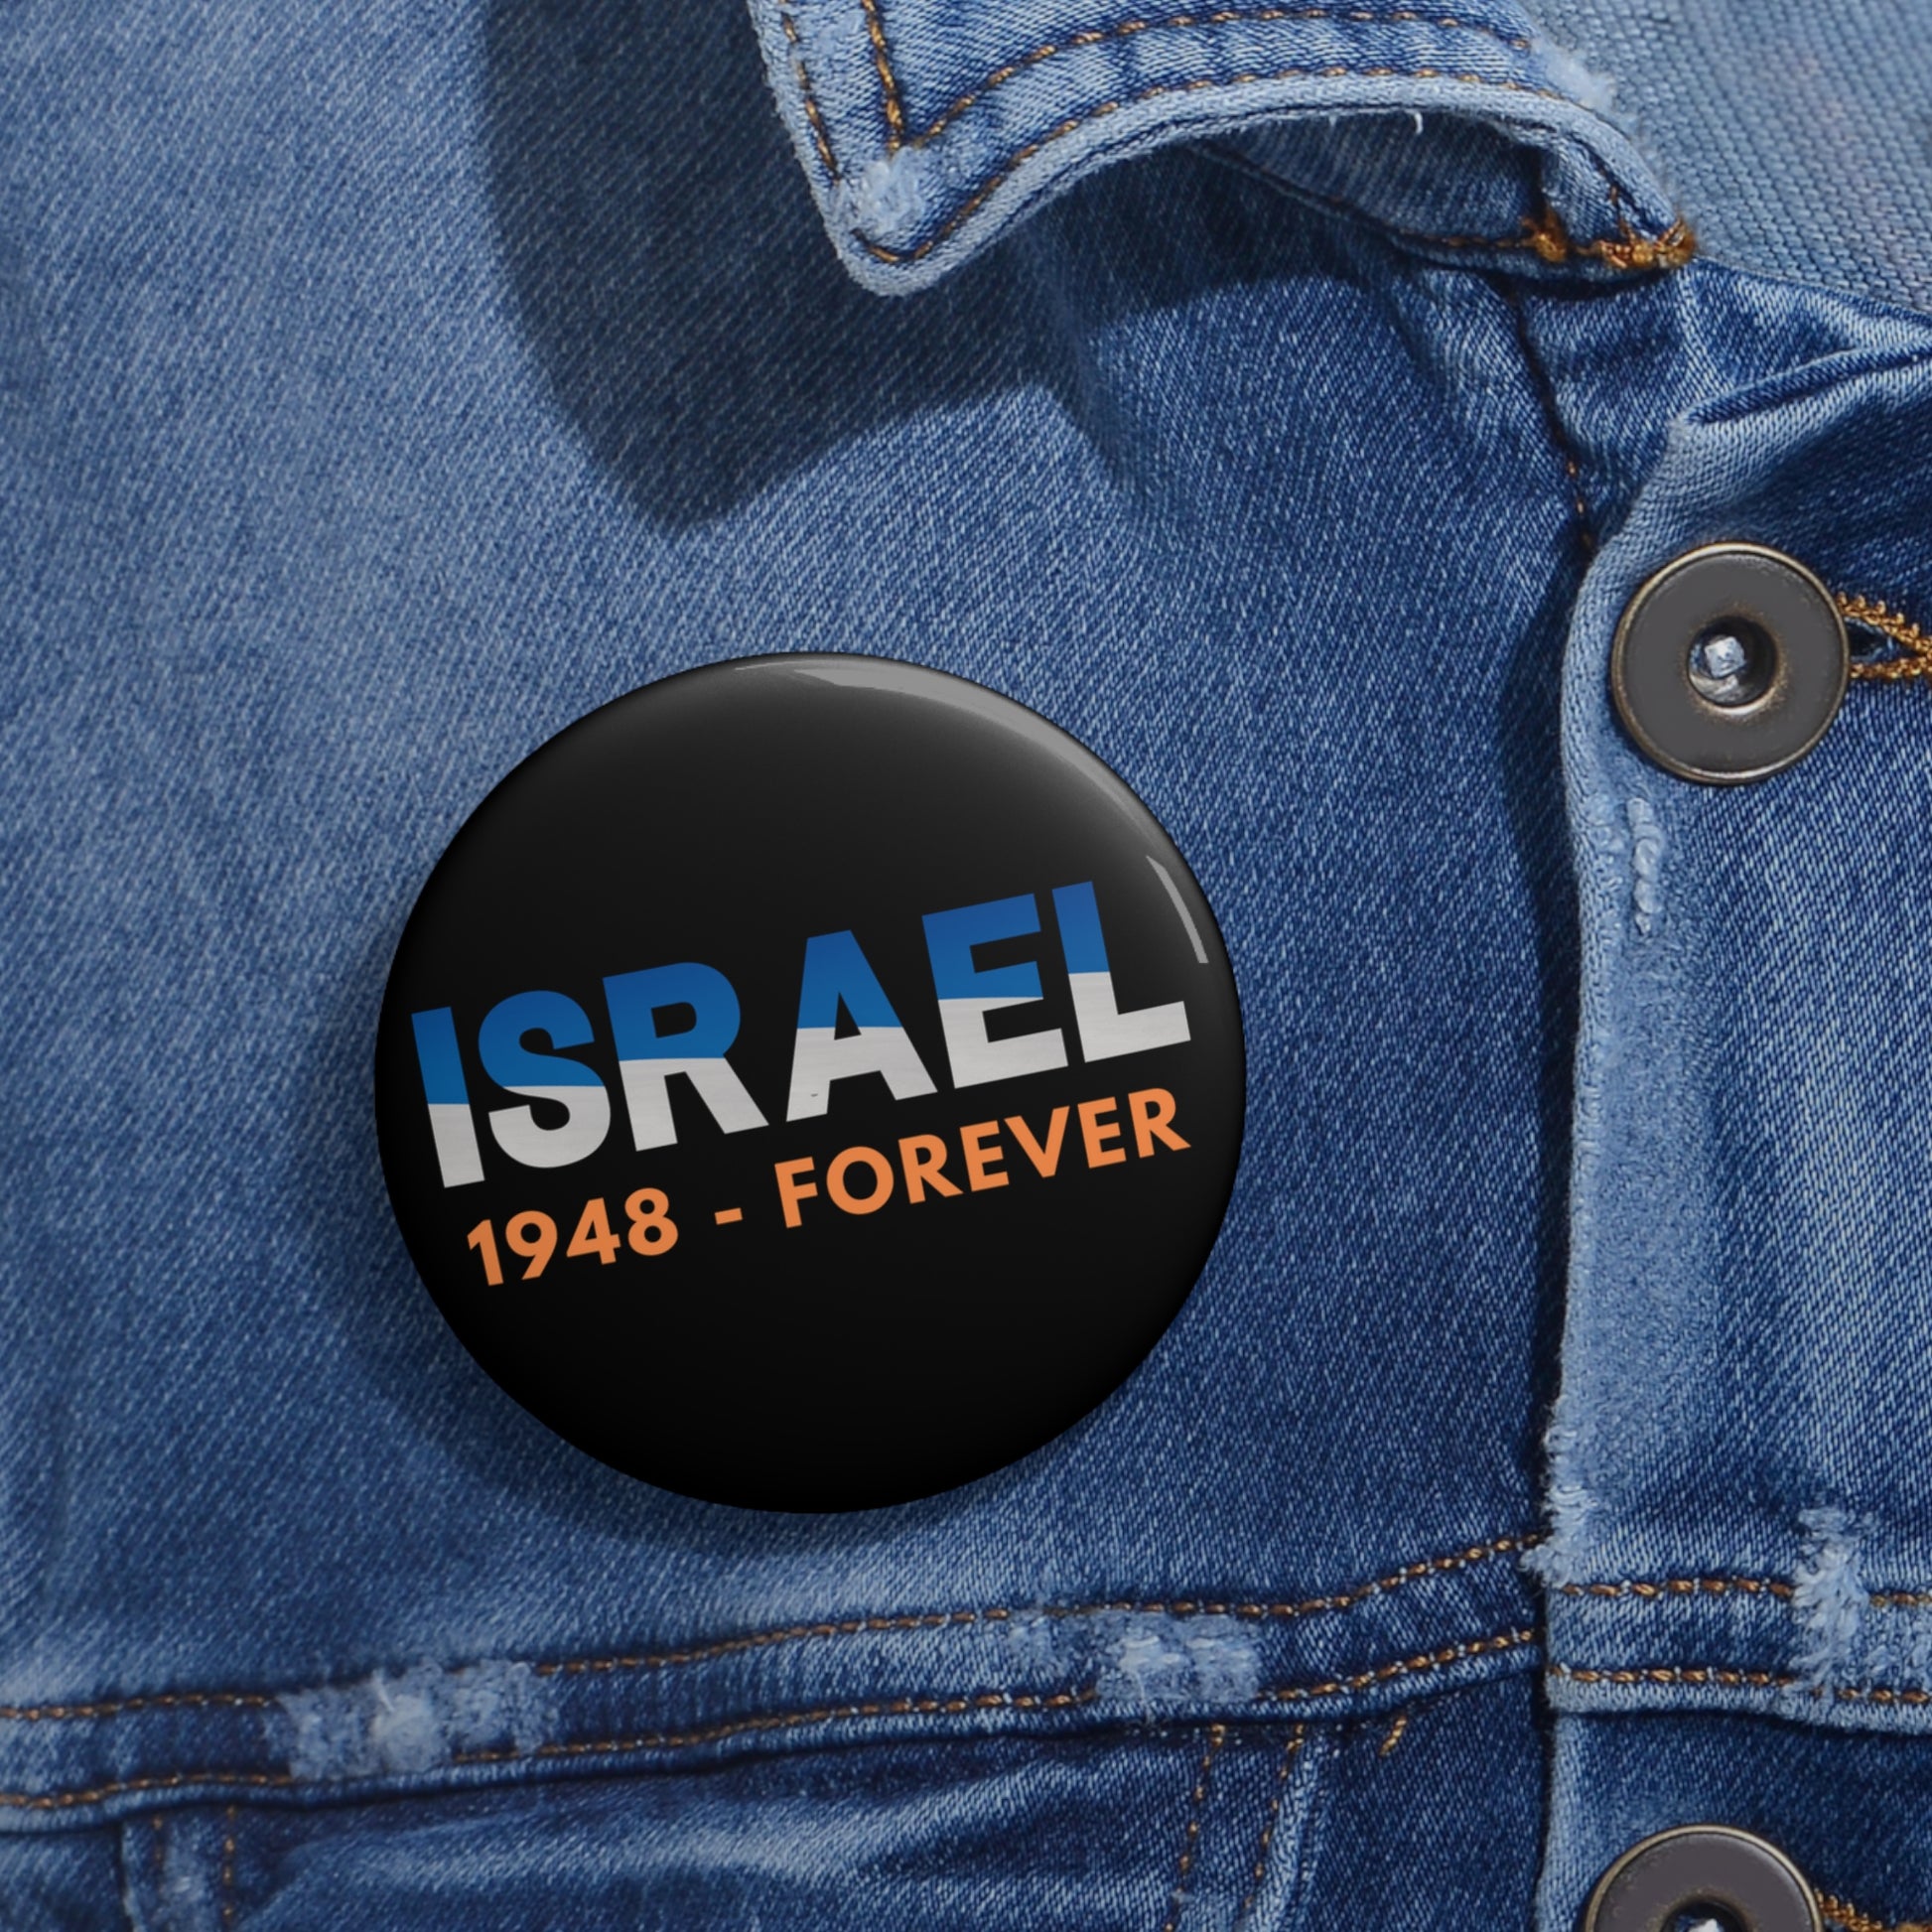 Israel 1948-Forever Pin